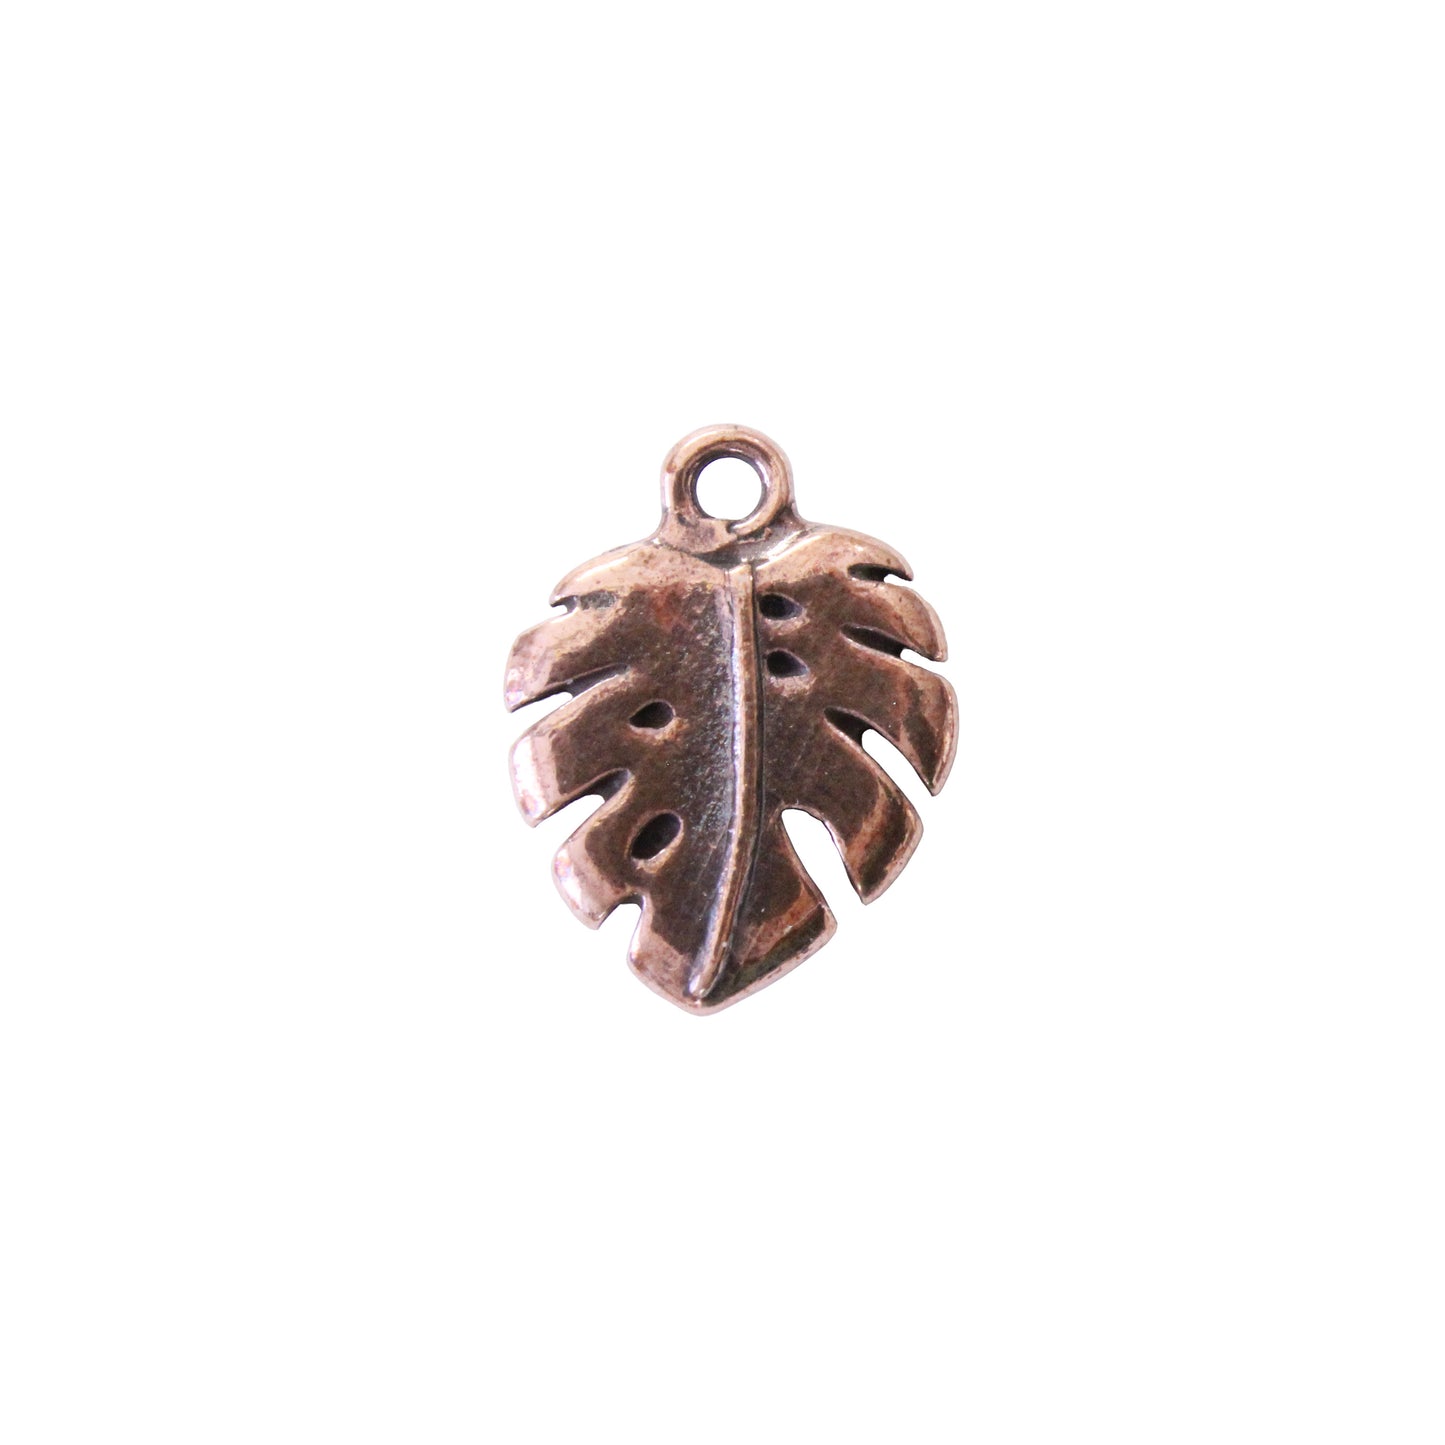 TierraCast Monstera Charm / pewter with antique copper finish  / 94-2577-18